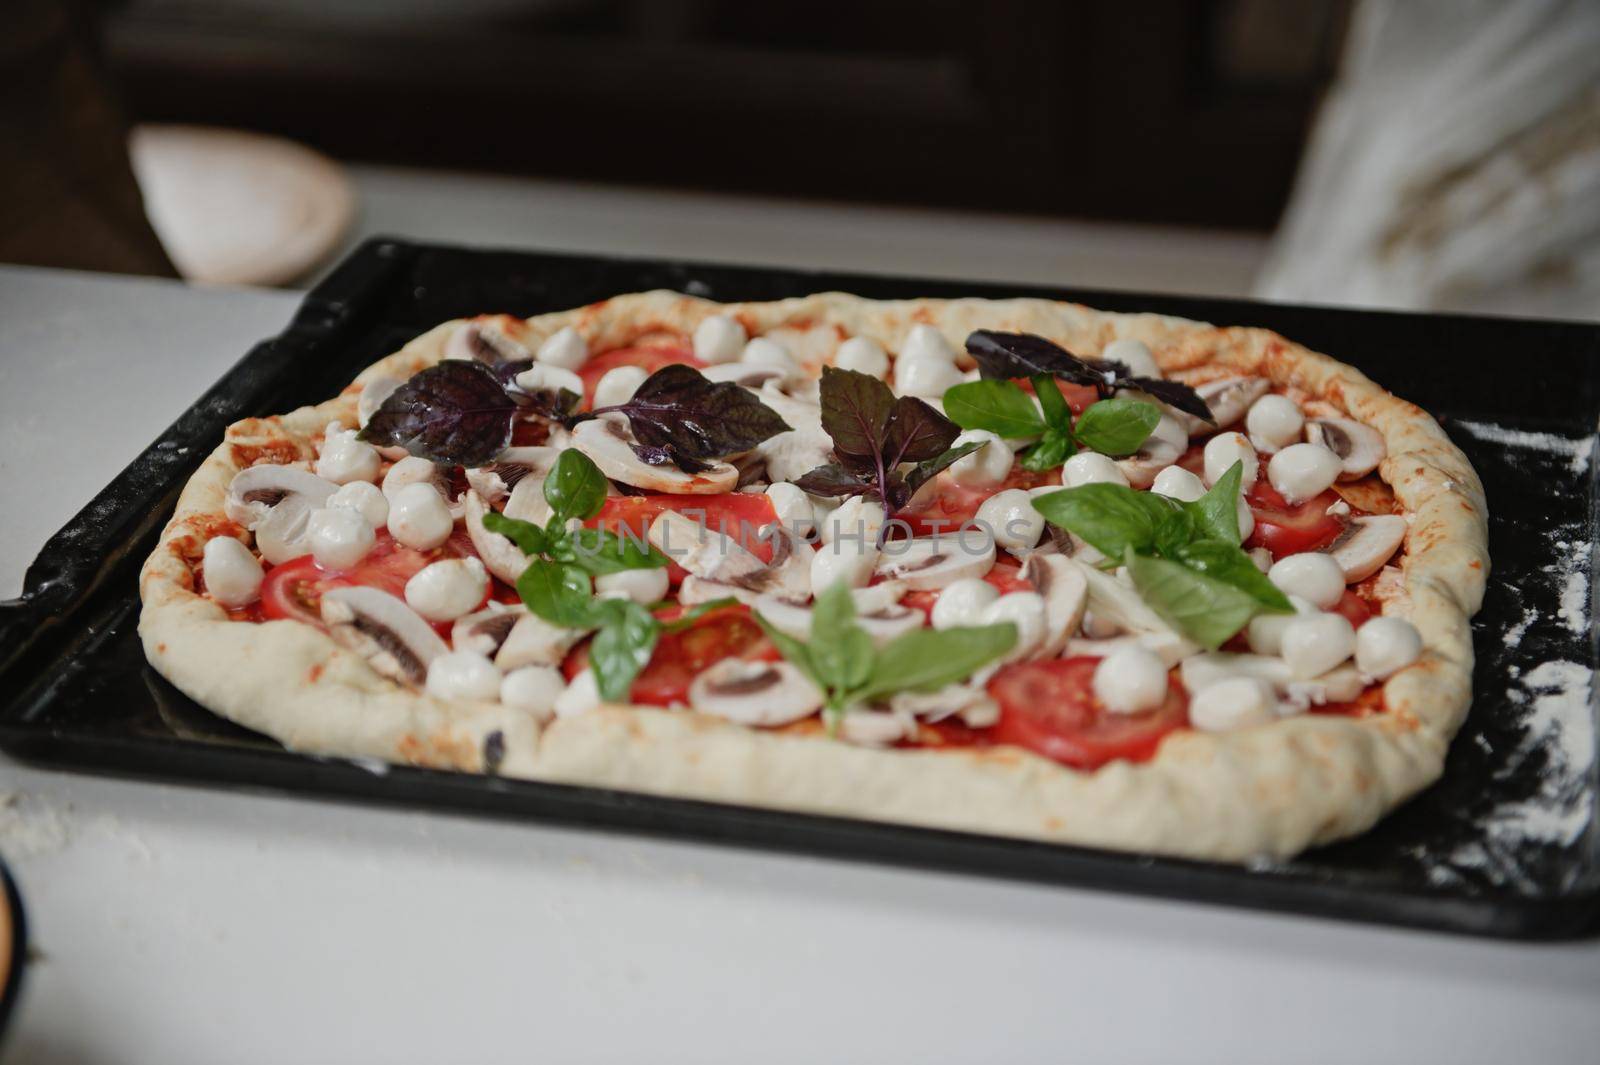 Appetizing raw Italian vegetarian pizza with fresh organic ingredients: sliced champignons, ripe juicy tomatoes, mozzarella cheese and feta in the sides on a pizza pan, on a white table background